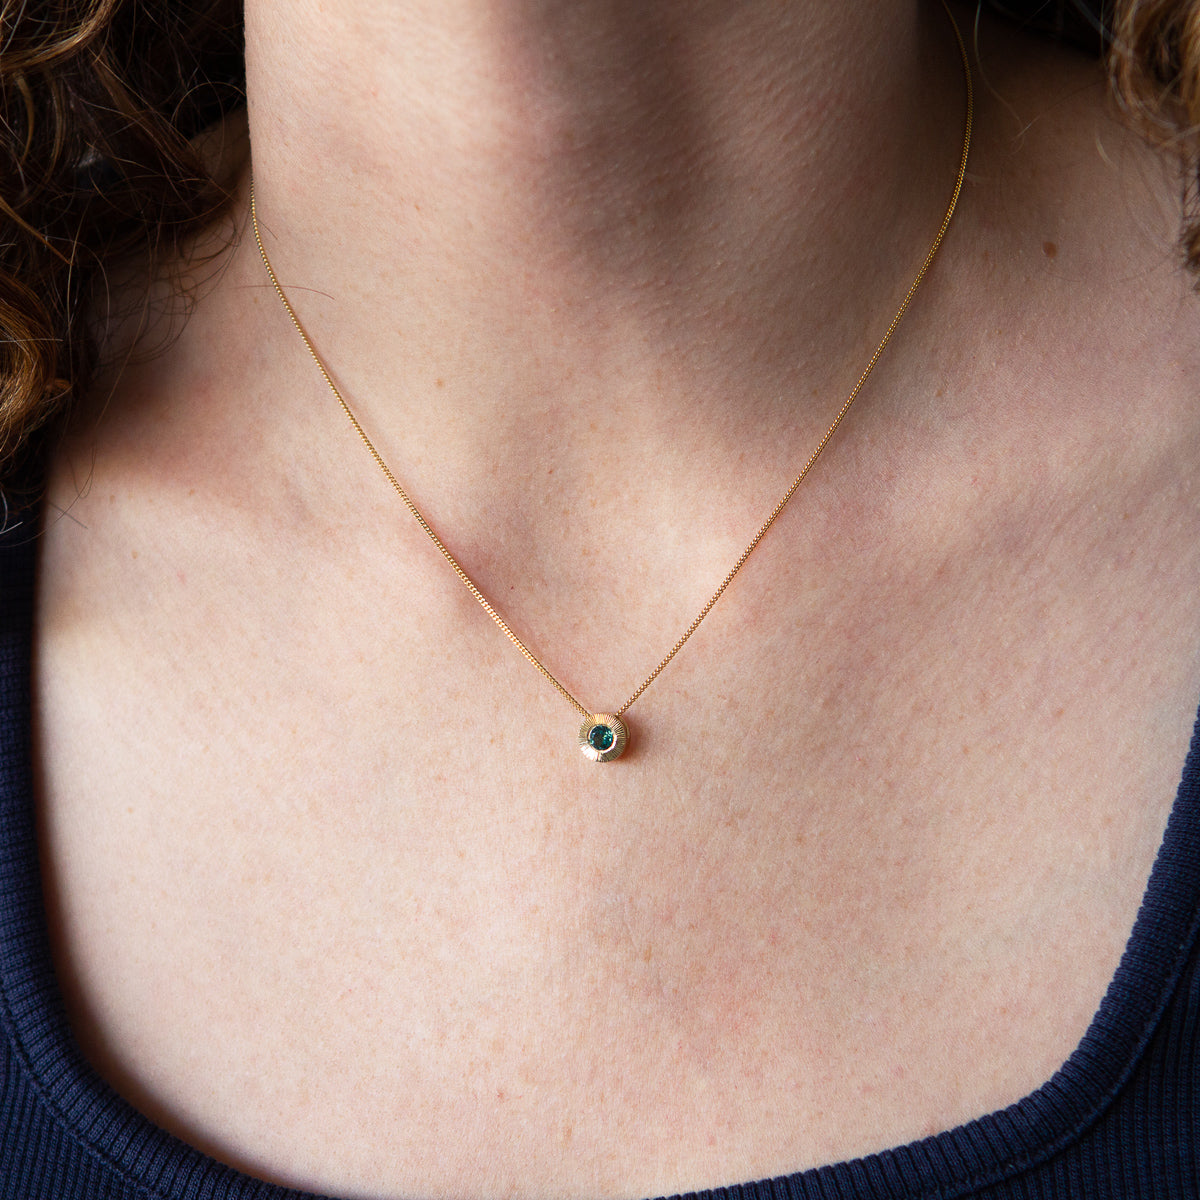 14k yellow gold medium Aurora necklace with a round teal green indicolite tourmaline center and engraved rays halo border on a 16" chain around a neck